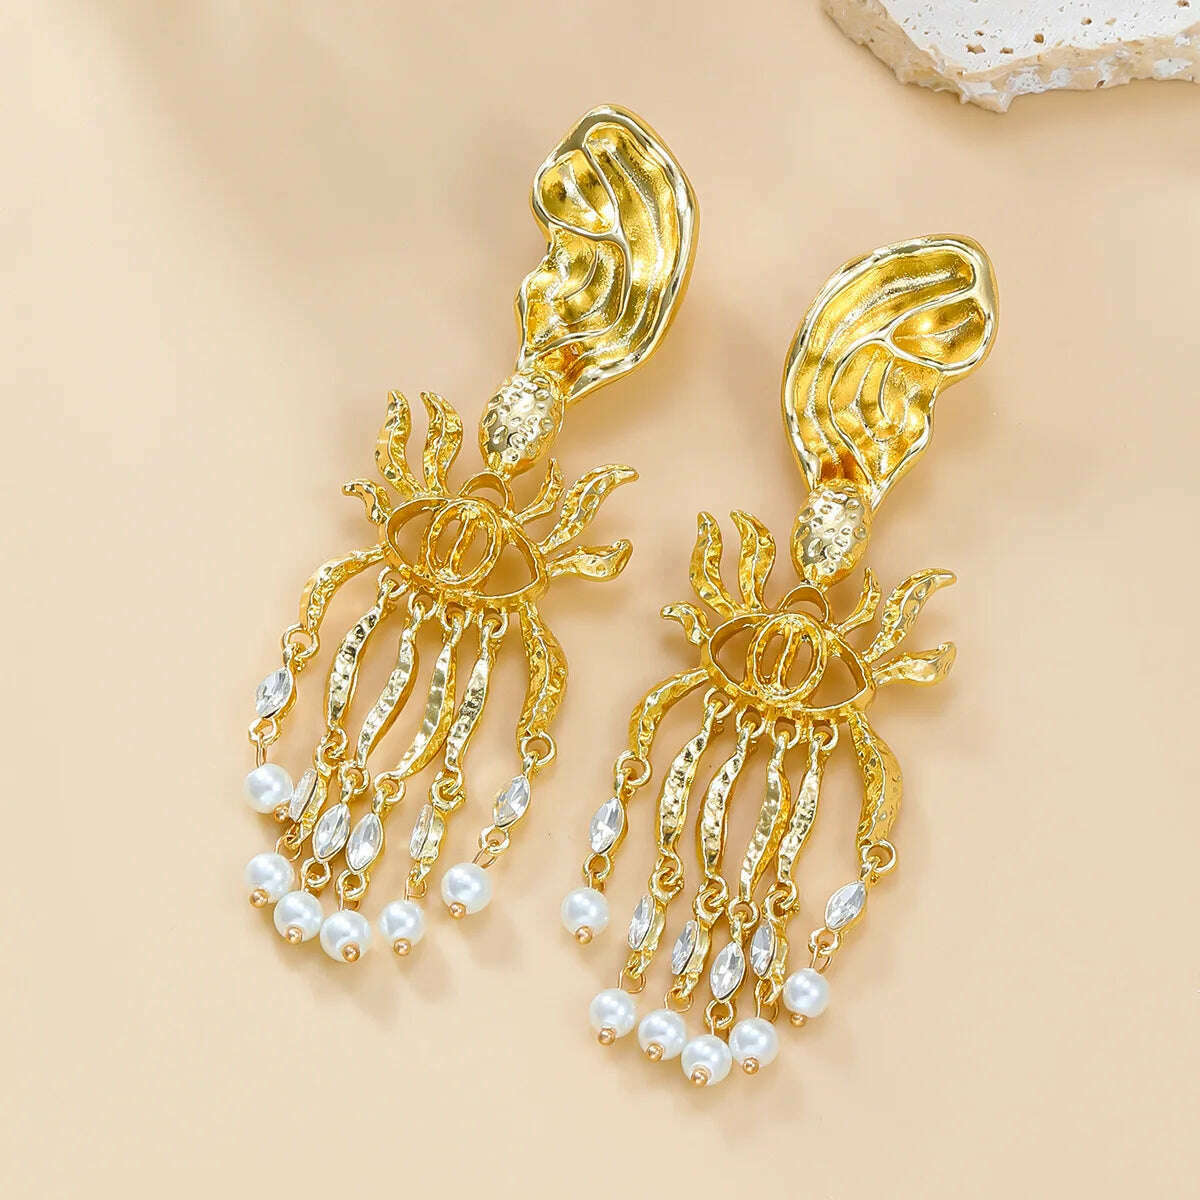 KIMLUD, Vintage Baroque Style Metal Eye Dangle Earrings For Women Jewelry Exaggerated Fashion Show Statement Earrings  Accessories, golden yellow, KIMLUD Women's Clothes